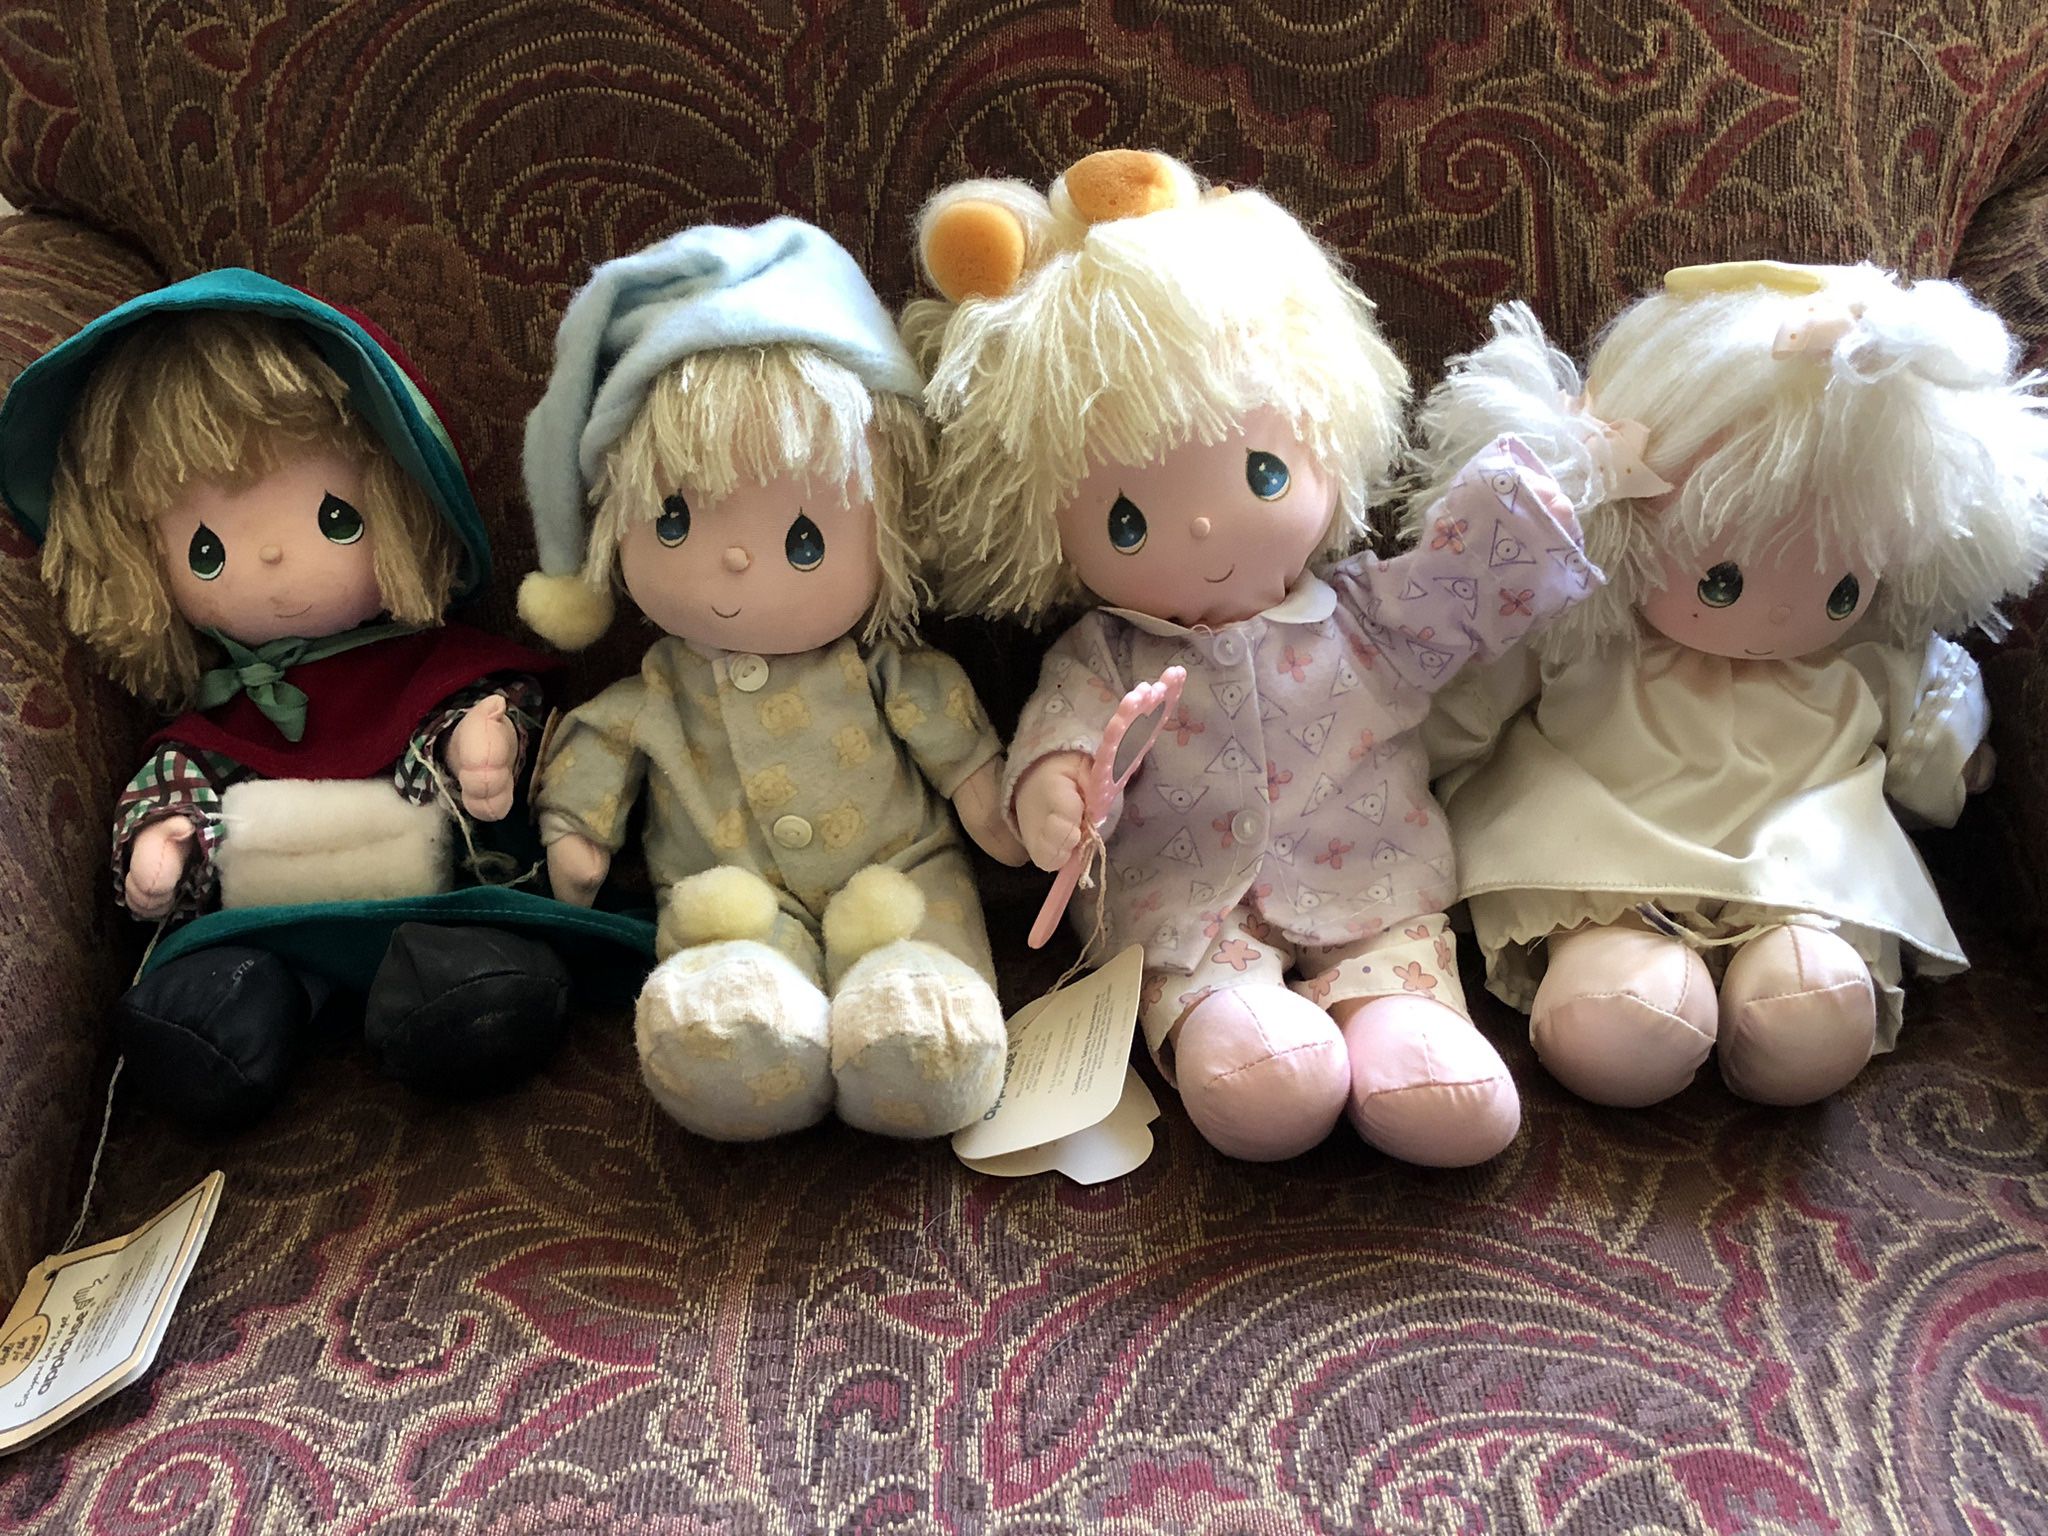 Vintage Precious Moments Dolls - Three are Wind-up Musical 